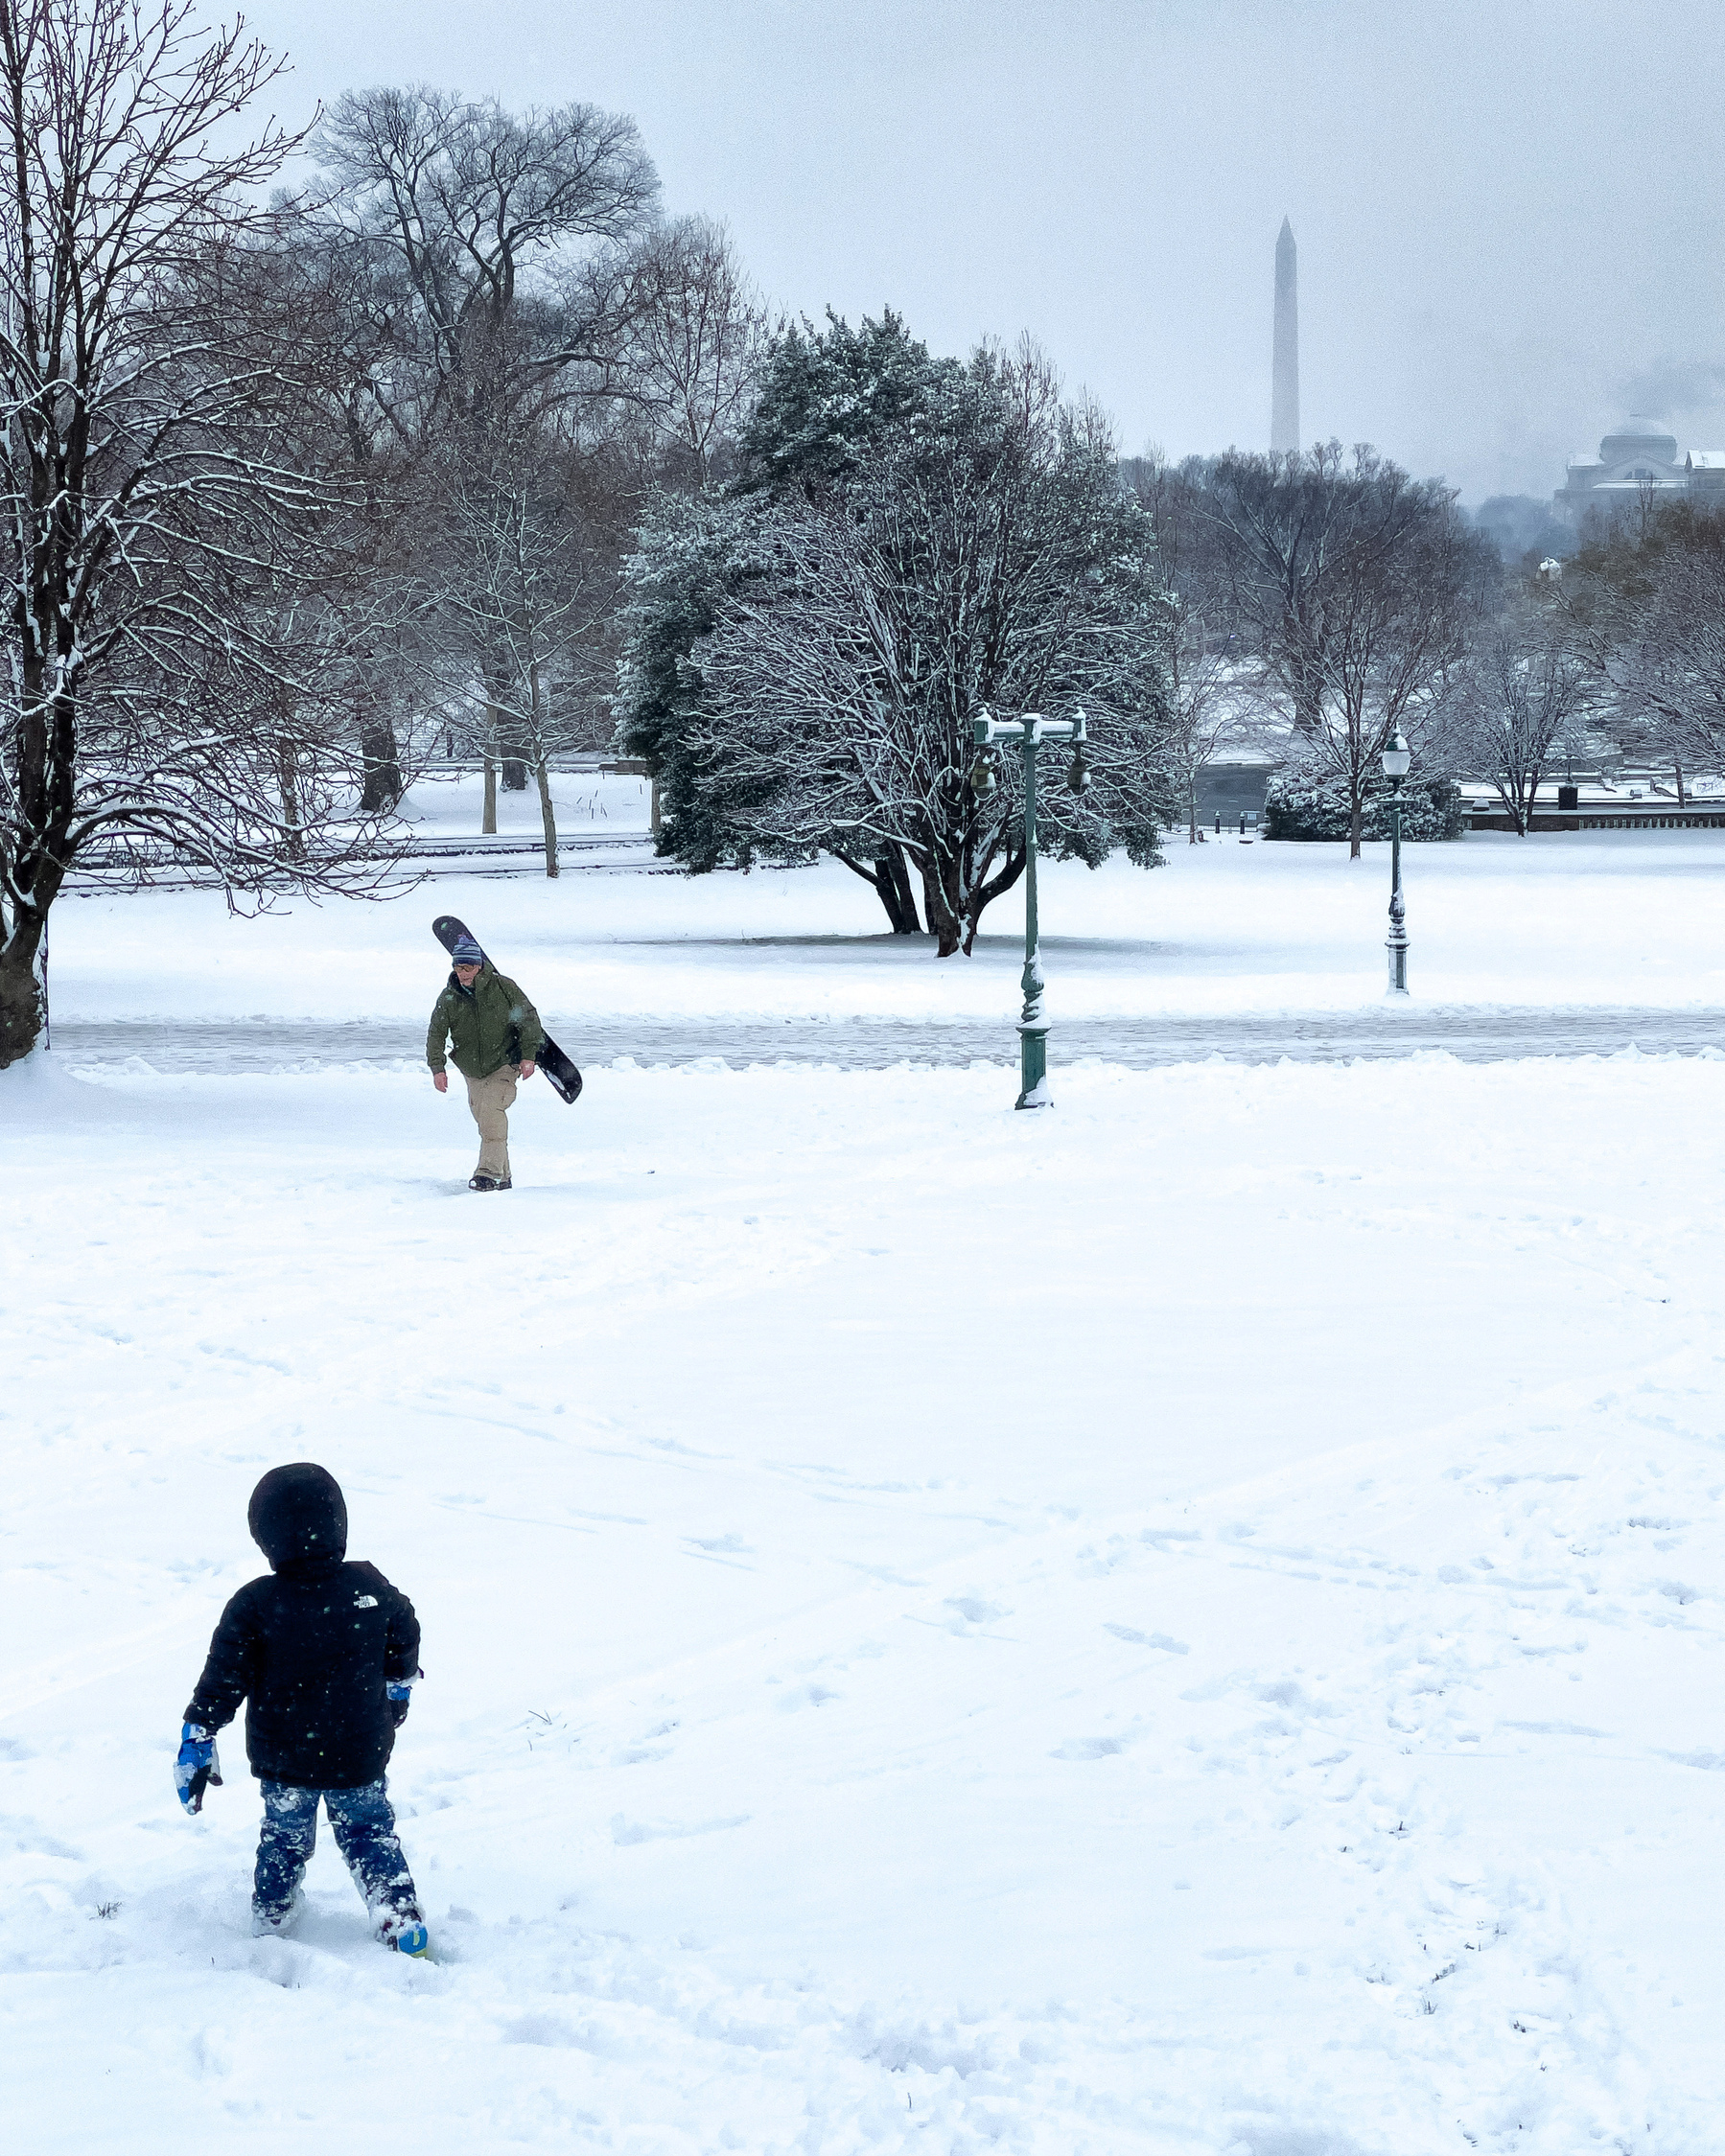 Taken from Capitol Hill, a small child’s back is to the viewer, a man with  a snowboard is walking towards us up a slight hill, and the Washington monument is visible in the distance. Everything is covered in snow.